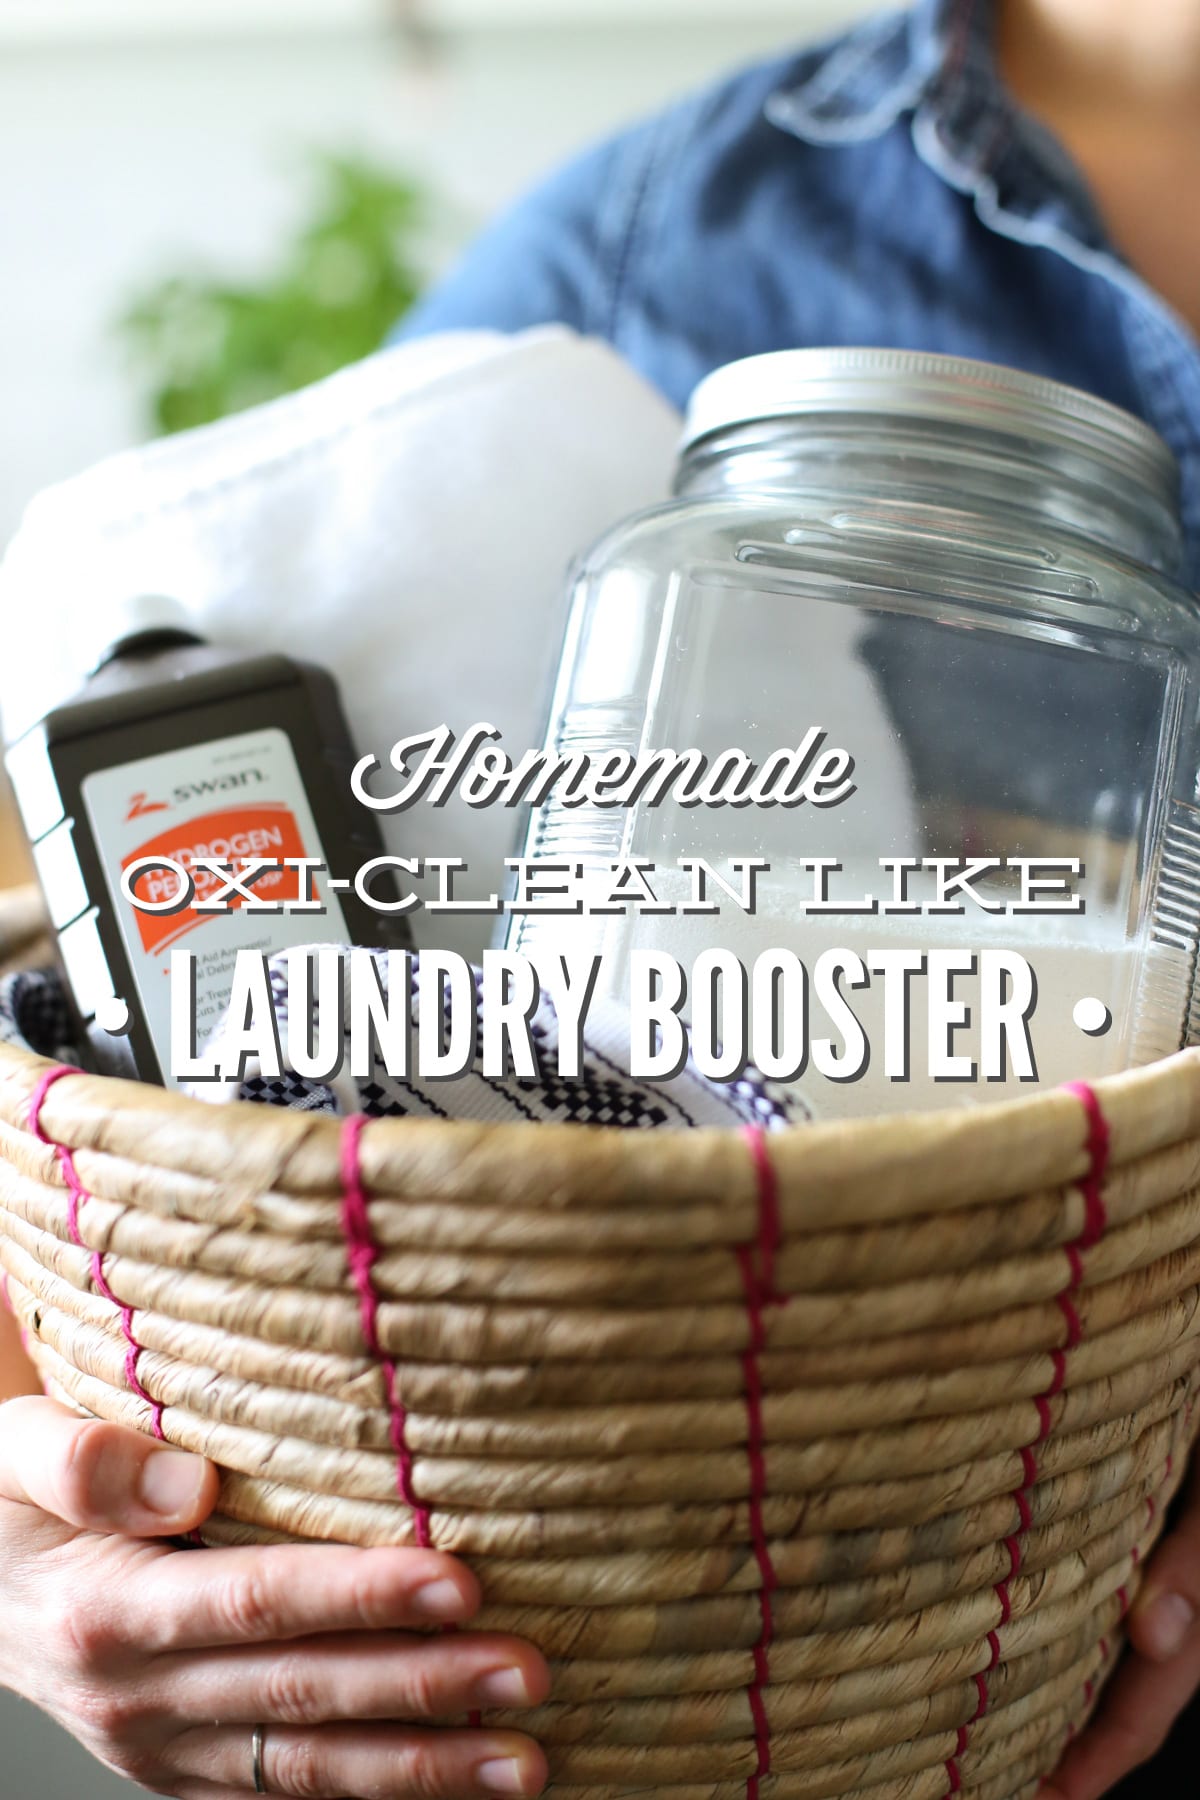 Homemade Oxi-Clean Like Laundry Booster